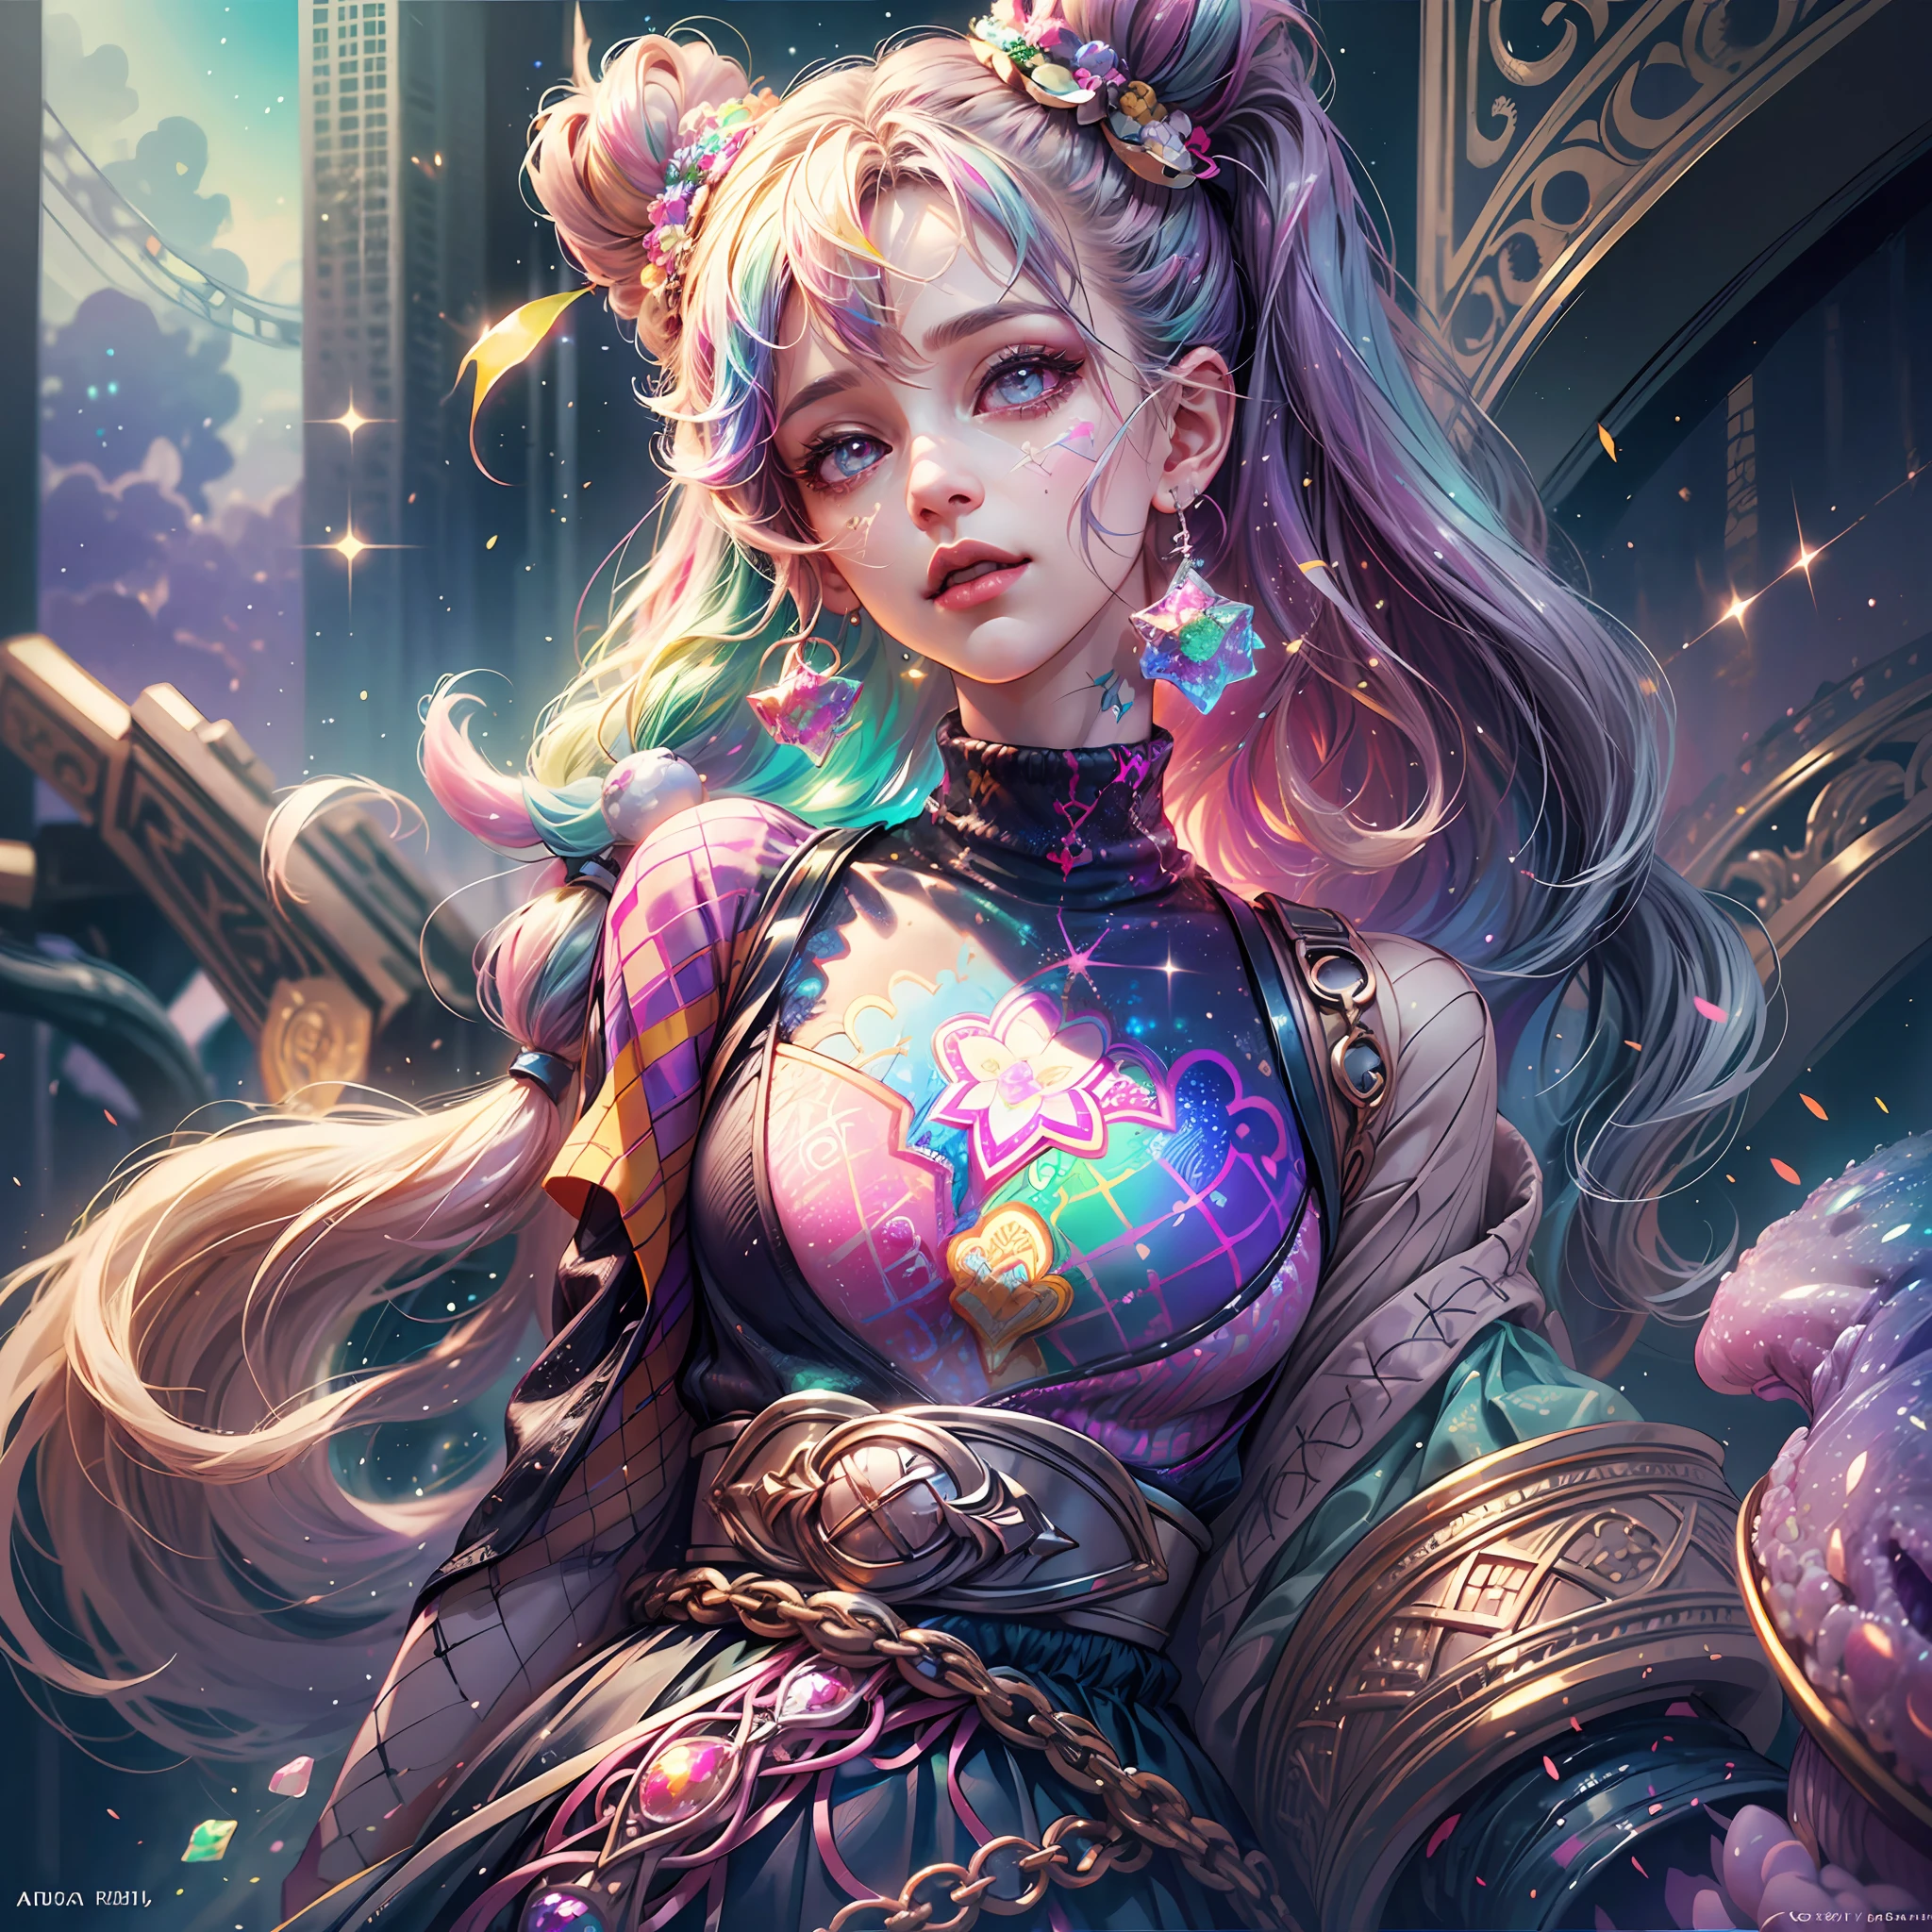 This image should be colorful and euphoric with extreme fantasy elements and very bold colors. Use (((lora:ArcherTurtleneck:1))). Generate a beautiful  nymph with ornate and highly detailed Decora Harajuku fashion aesthetics on an interesting Harajuku street background. Her head, torso, and hips are in frame. The nymph should have a mature face with a lot of character and visual interest. Include beautiful eyes, highly detailed eyes, extremely detailed eyes, intricate eyes, 8K eyes, macro eyes. Pay close attention to intricate facial details and realistic eye shading. Include bright lisa frank rainbow colors. ((Include many realistic fantasy and rainbow Harajuku and decora details)). Clothing should be very detailed and intricate in the style of extravagant Harajuku decora street fashion with a heavy emphasis on rainbow colors. Her shirt should contain contrasting textures, colors, and patterns (((lora:ArcherTurtleneck:1))). Her pants should be highly detailed and contain contrasting textures, colors, and patterns. The image is the highest quality possible, with rich colors and an extremely high resolution. Consider influences like the artwork and colors of Lisa Frank. Utilize bright ambient lighting and dynamic composition to enhance a feeling of happiness and ((euphoria)). The image should contain shimmer, phantasmal iridescence, crystals, and bumps. (((lora:ArcherTurtleneck:1))). (((Include many decora fashion accents.)))